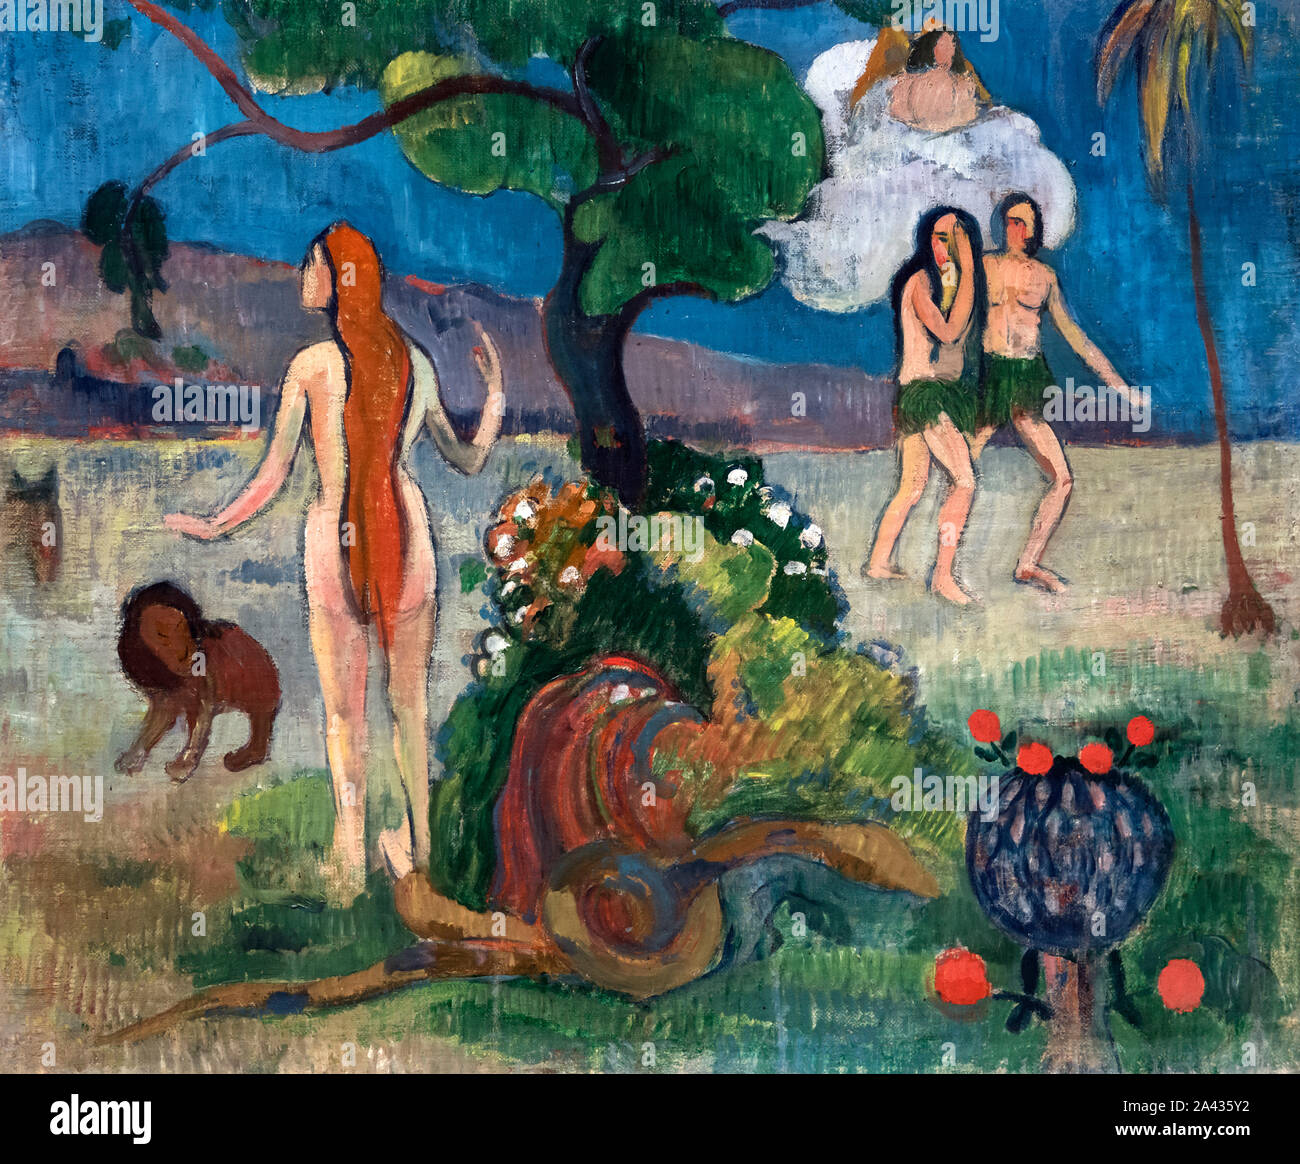 Paradise Lost by Paul Gauguin (1848-1903), oil on canvas, 1890 Stock Photo